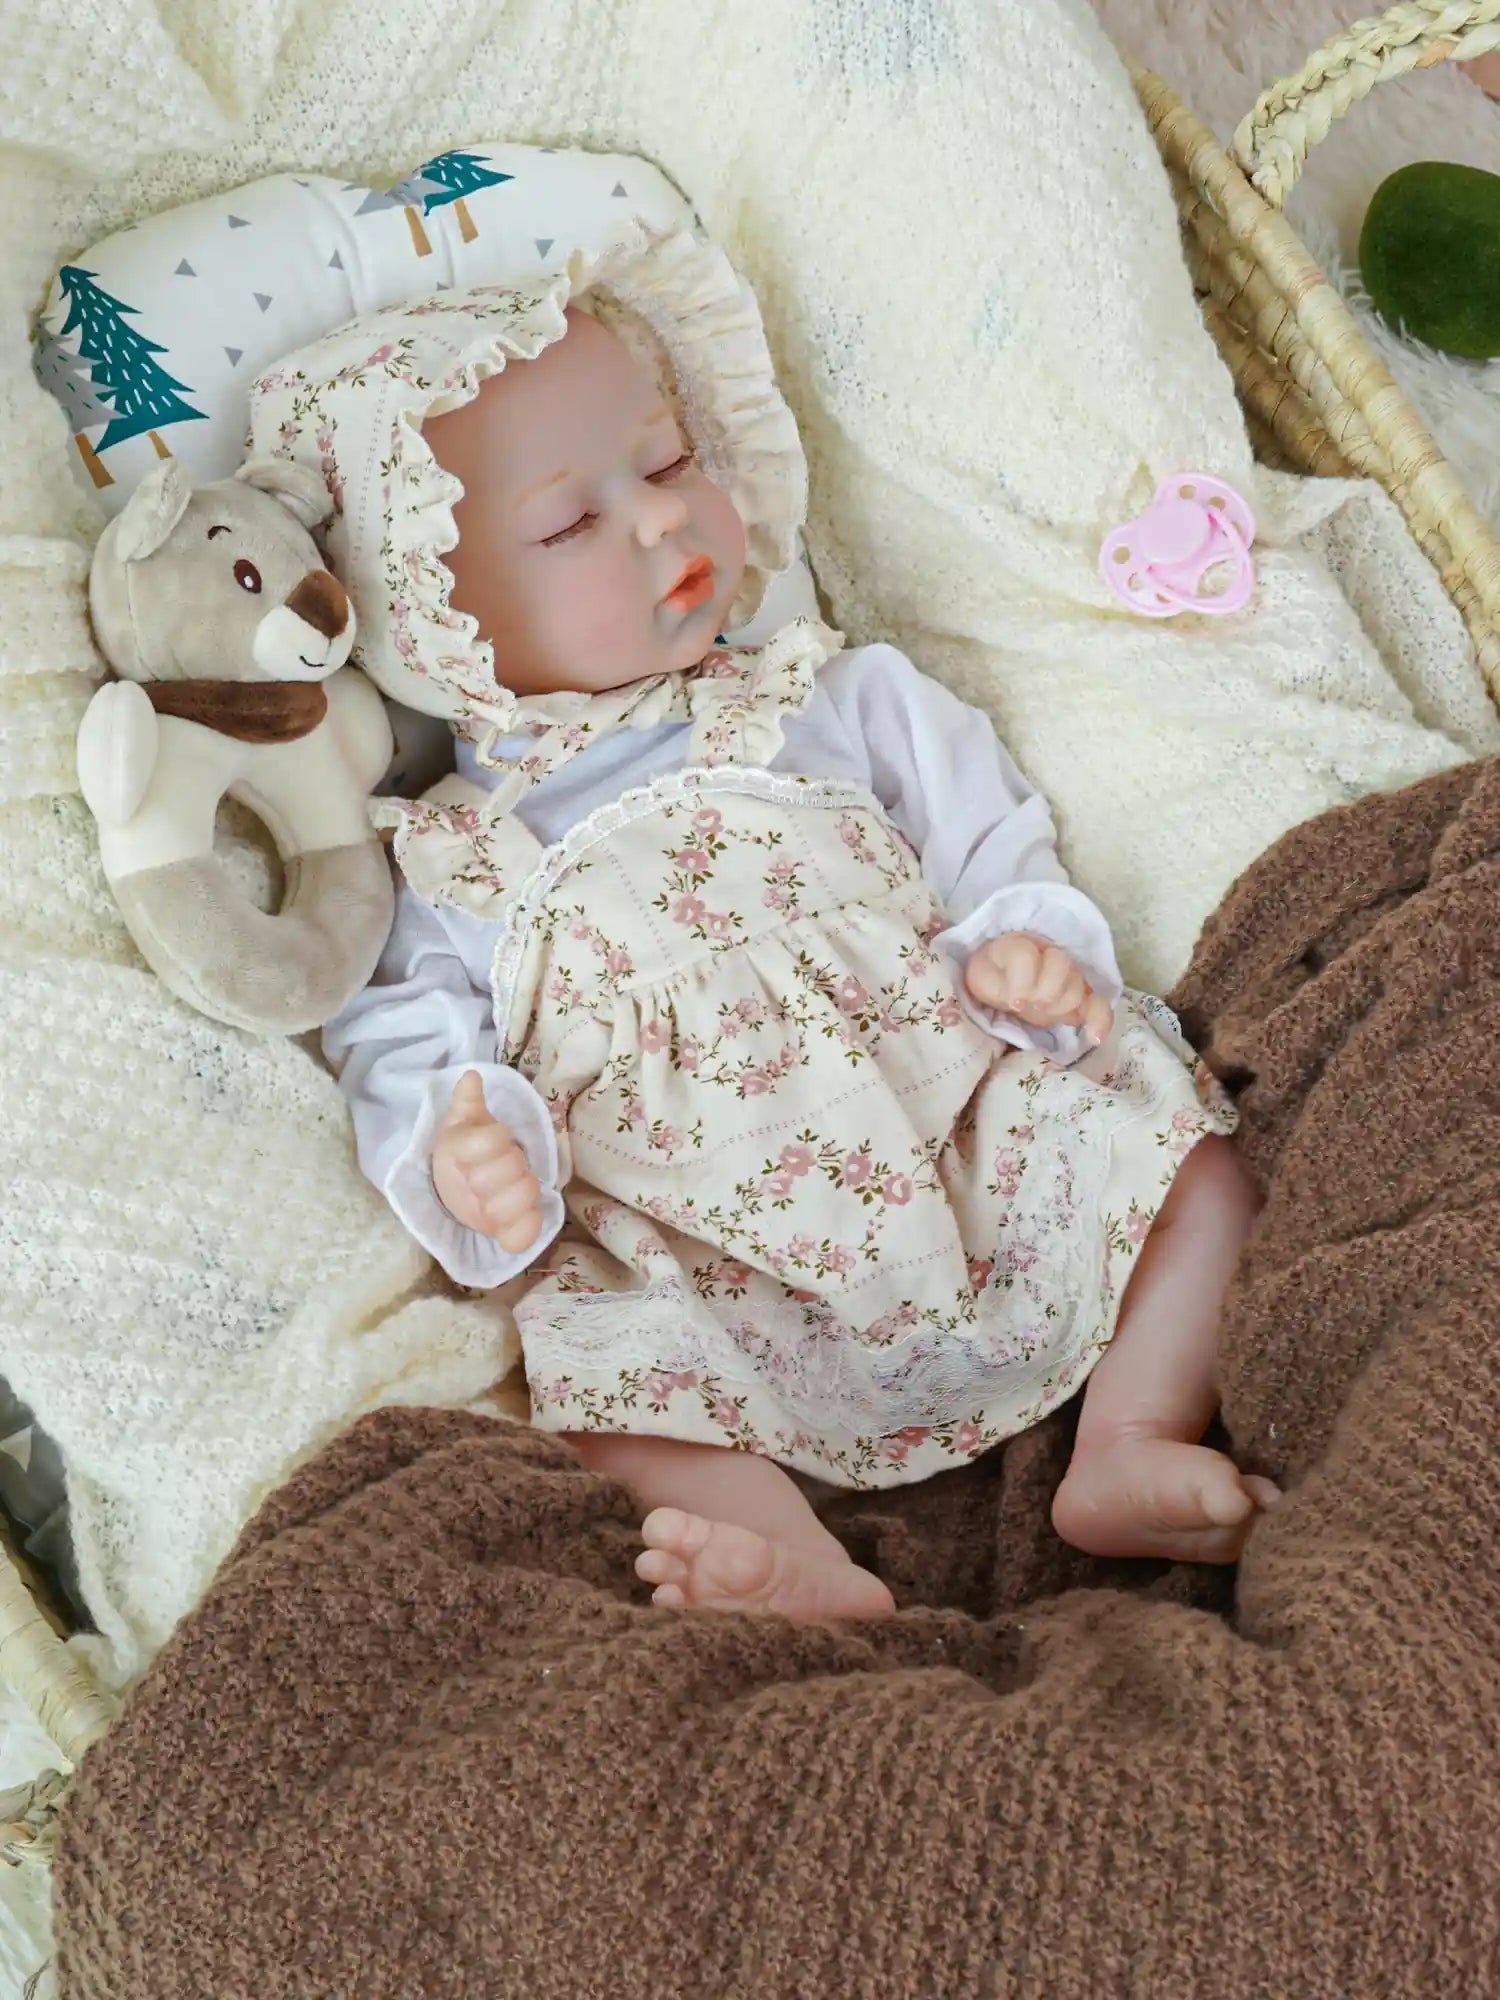 A reborn baby doll with a floral bonnet and matching dress, peacefully sleeping in a woven basket, nestled in a cream-colored blanket. A pink pacifier is in its mouth, and a plush teddy bear lies beside it.